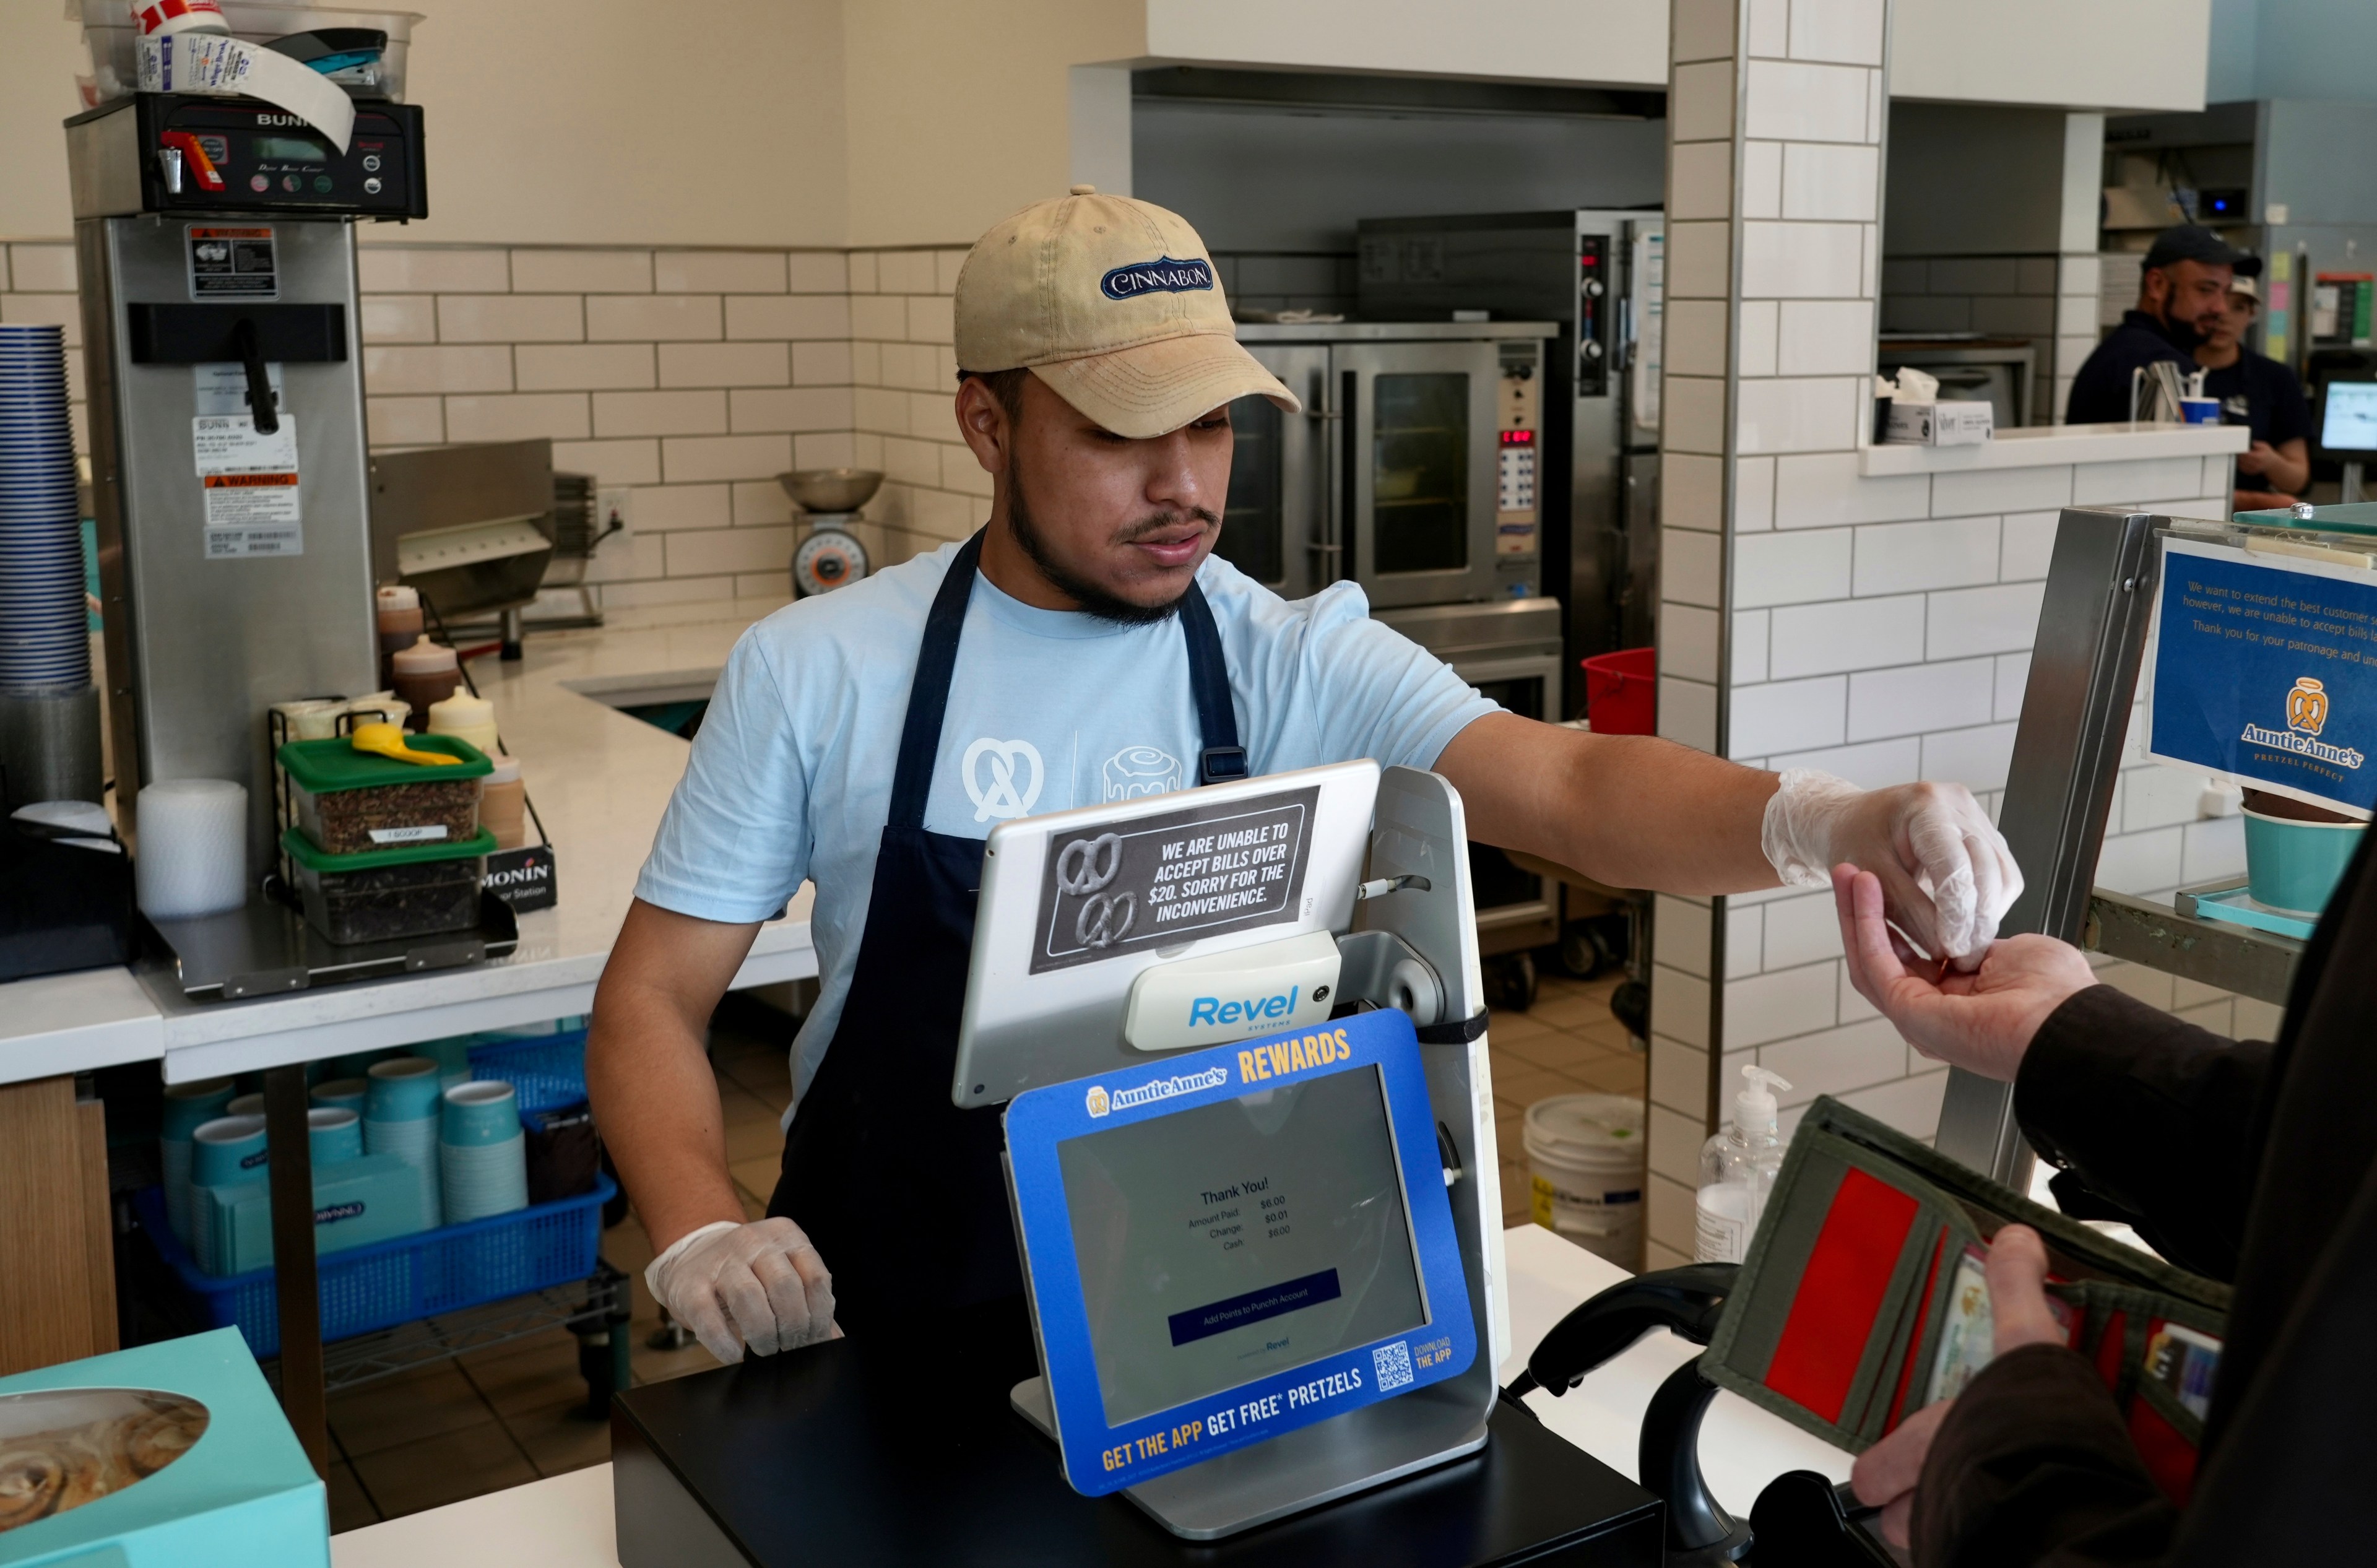 A cashier in a cap and apron hands a receipt to a customer at a fast-food counter, with kitchen equipment in the background.